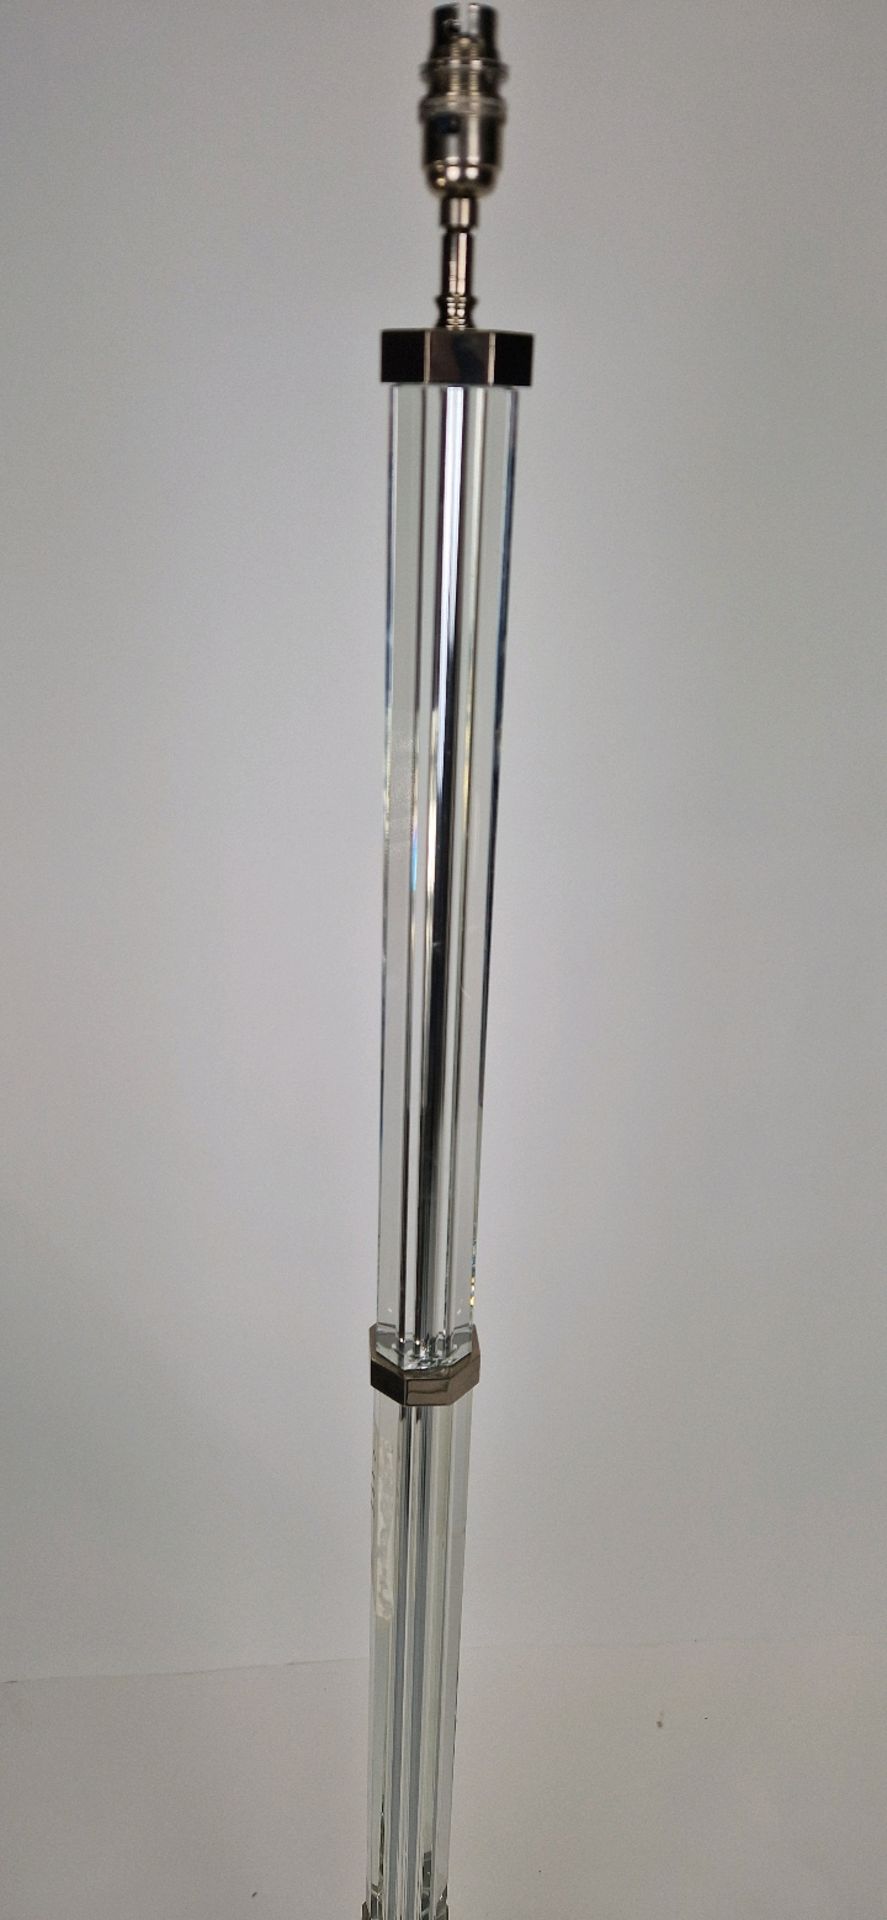 GLASS AND CHROME FLOOR LAMP - Image 3 of 4